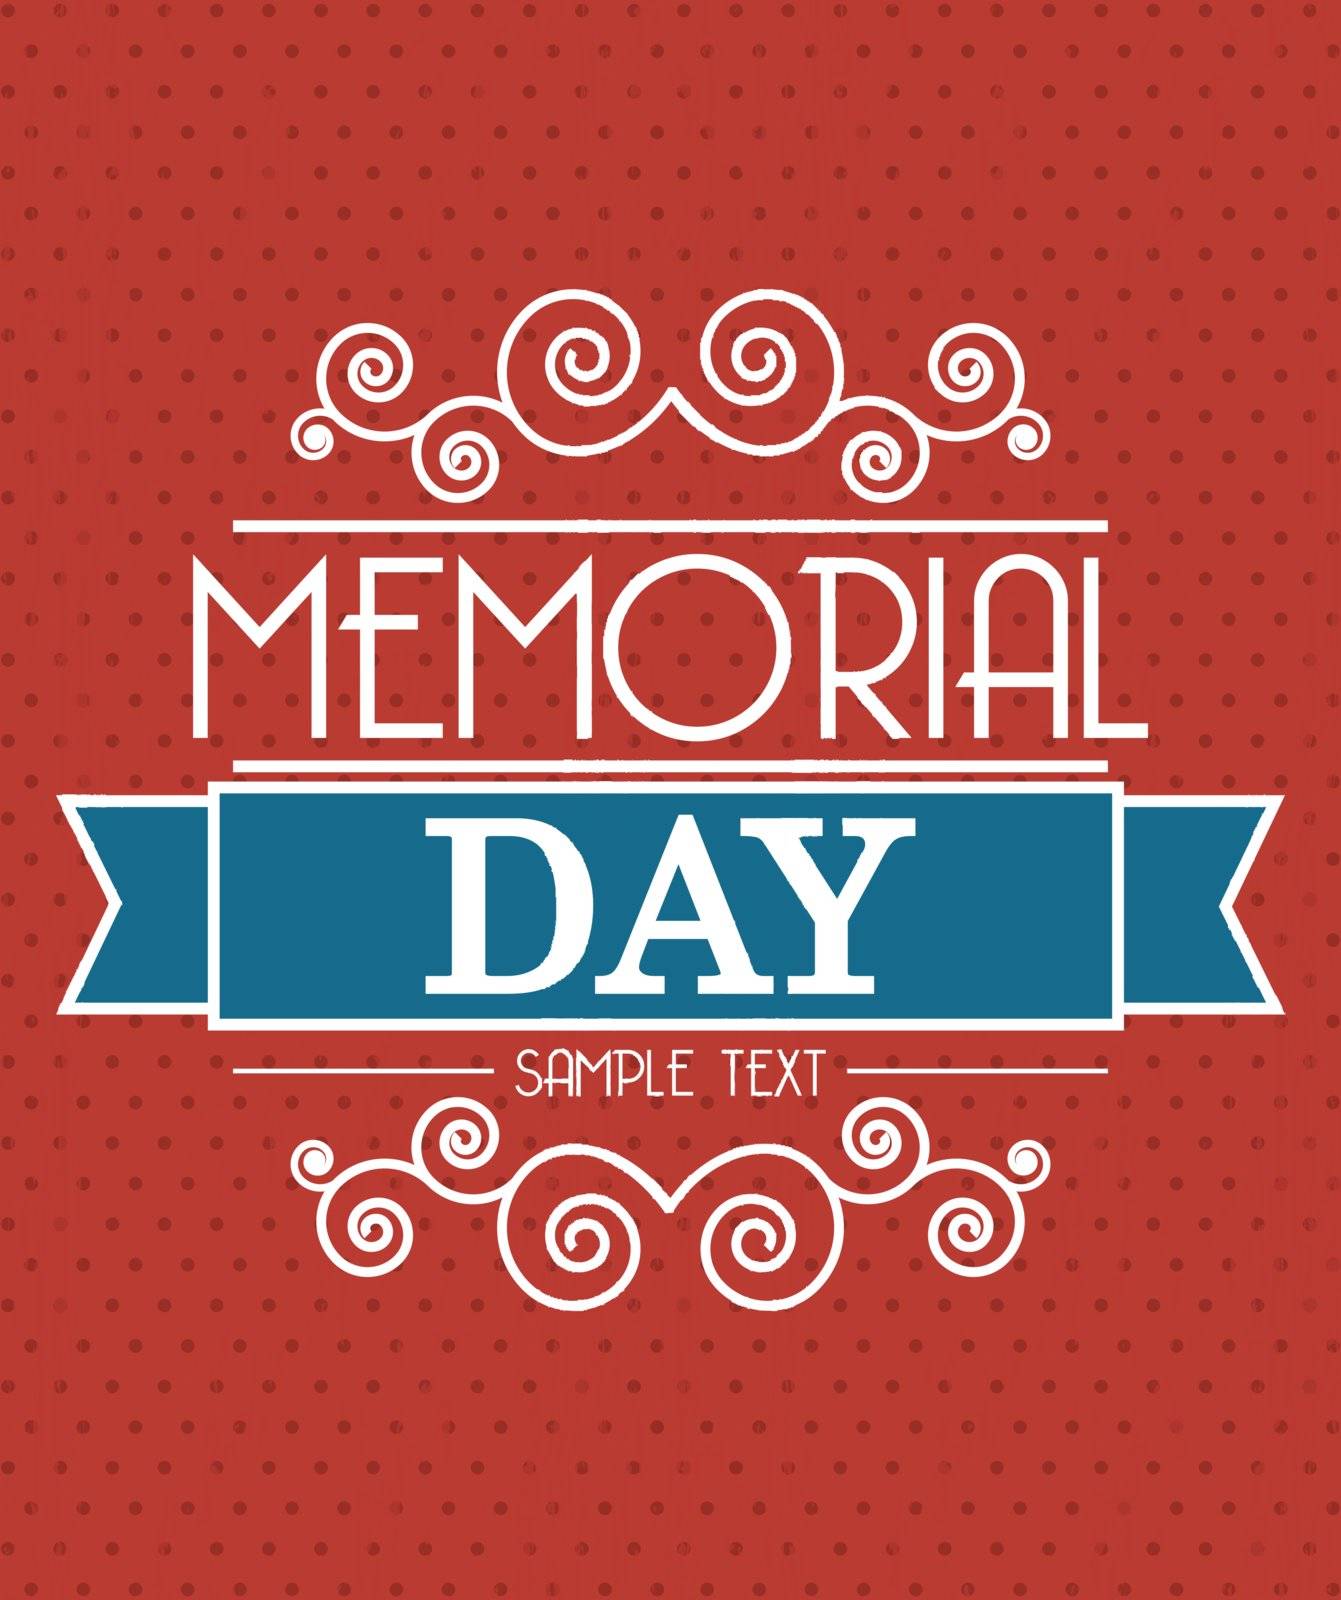 memorial day card over red background. vector illustration